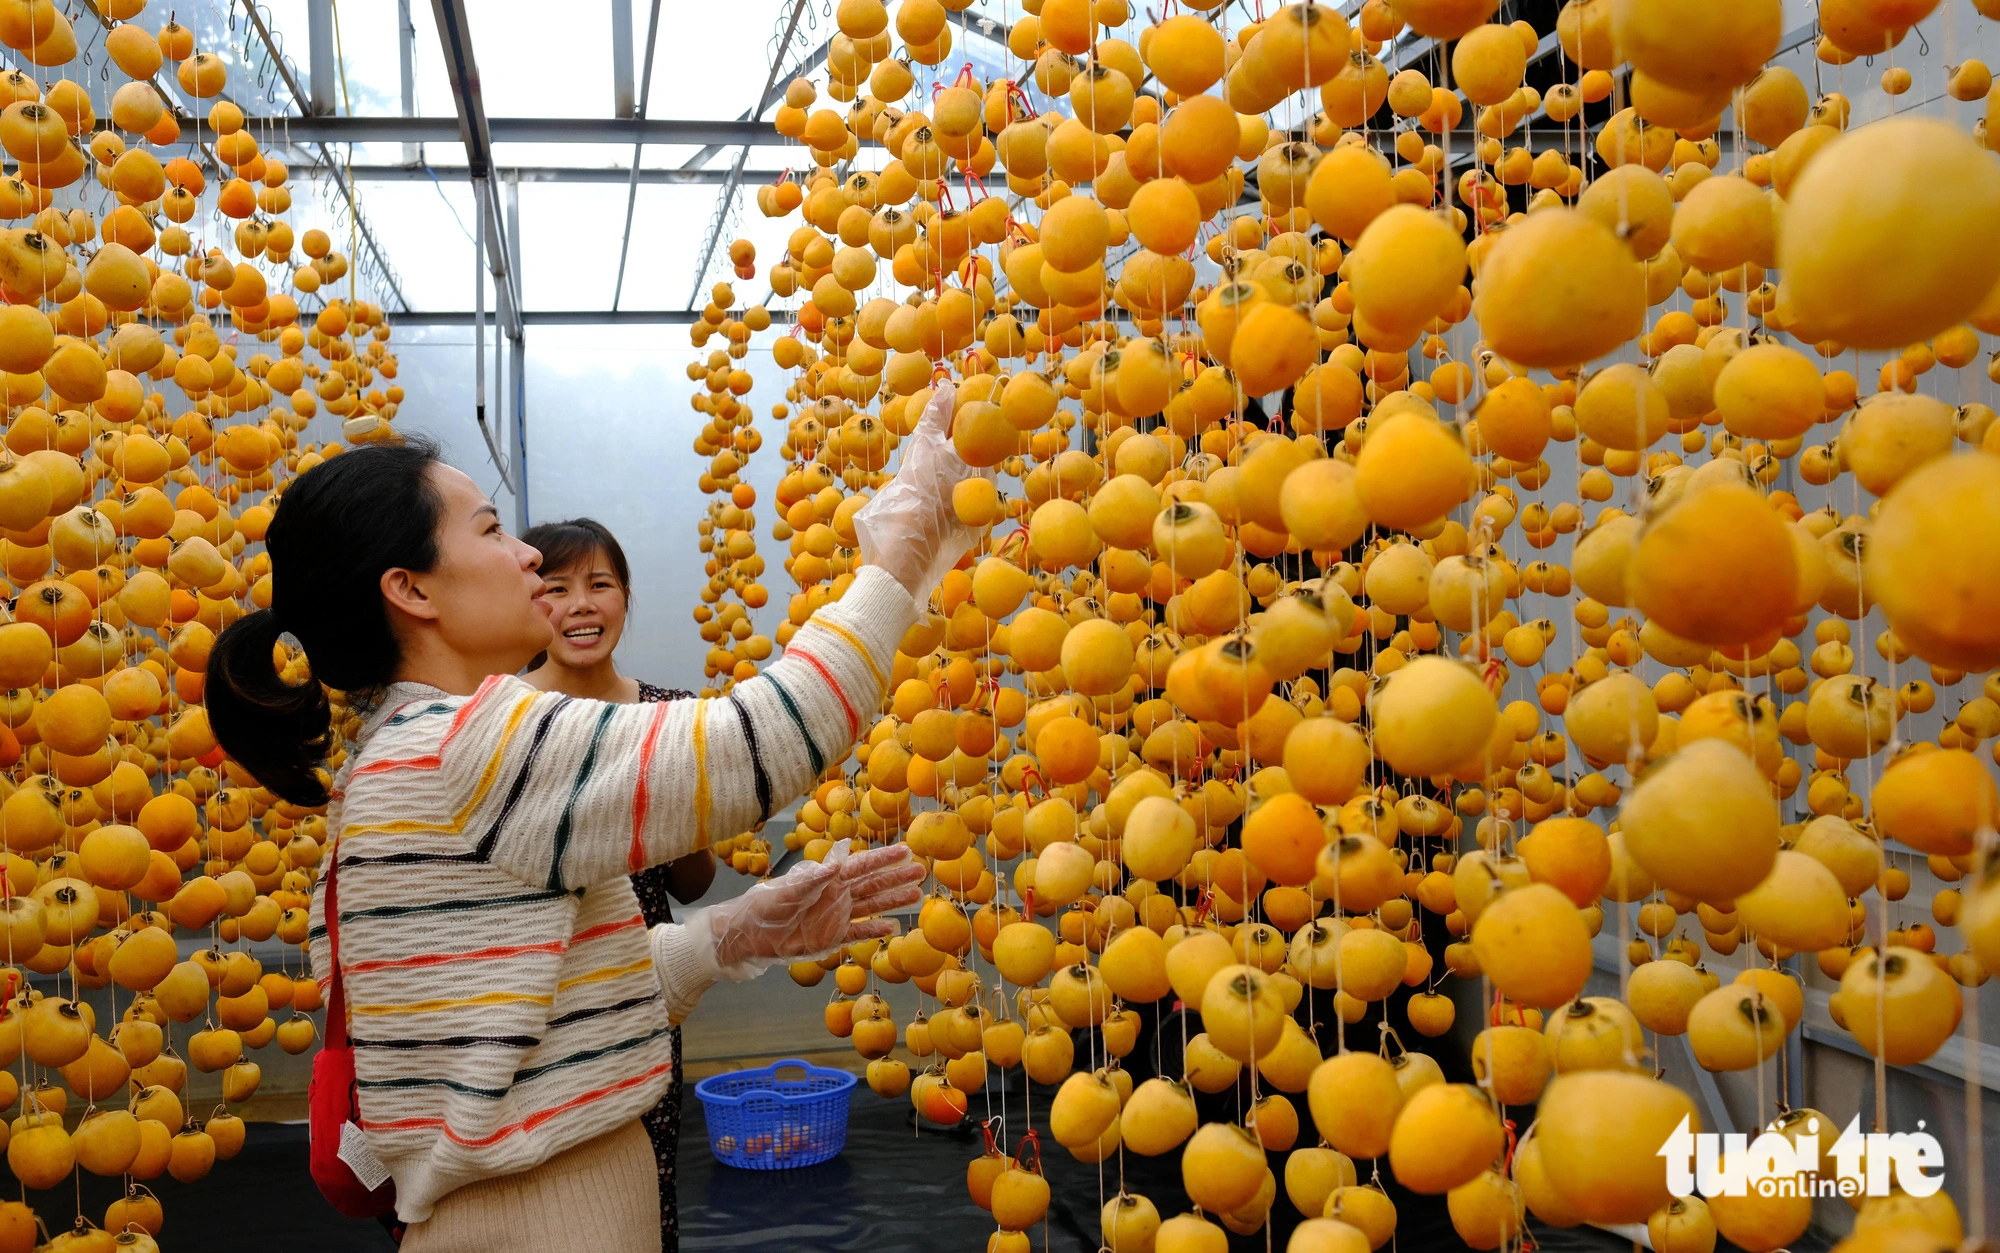 Tourists learn about the process of making wind-dried persimmons at a facility along the route from the city center to the suburb of Cau Dat in Da Lat City, Central Highlands, Vietnam. Photo: Minh An / Tuoi Tre